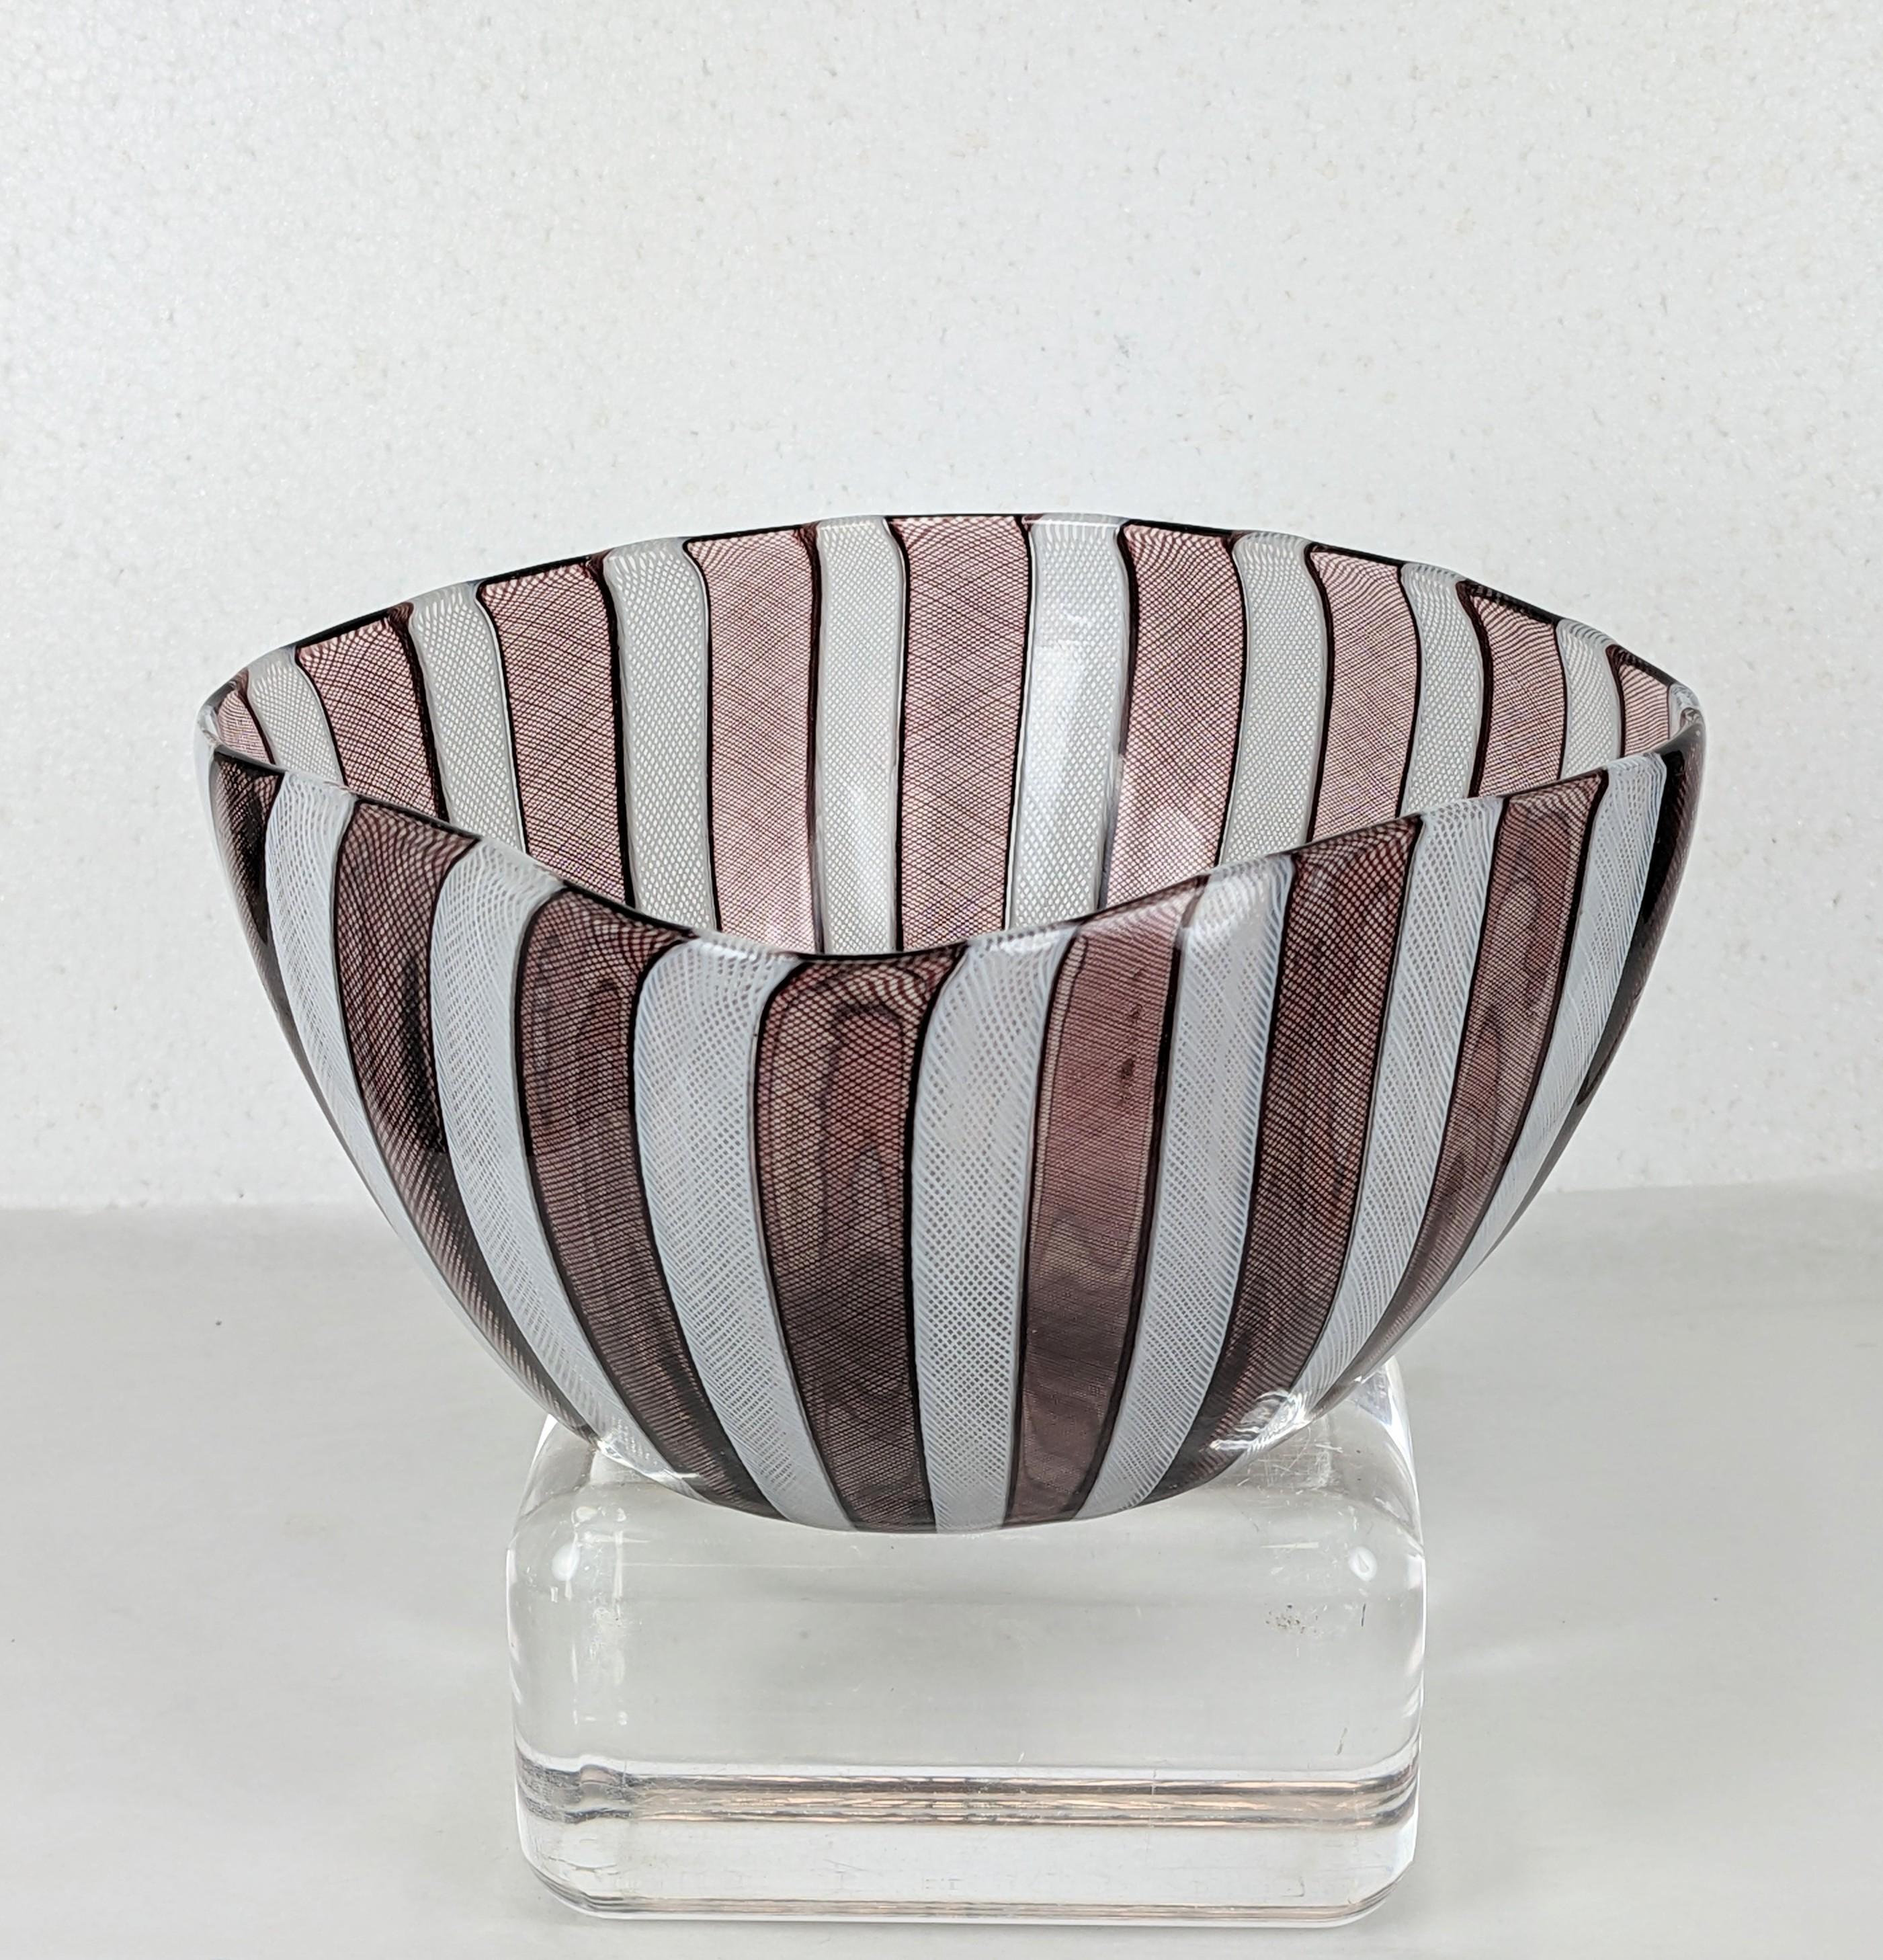 Elegant Venetian Squared Glass Bowl with ribbons of white and aubergine latticino work. Remnants of paper label circa 1950's, Murano Italy.